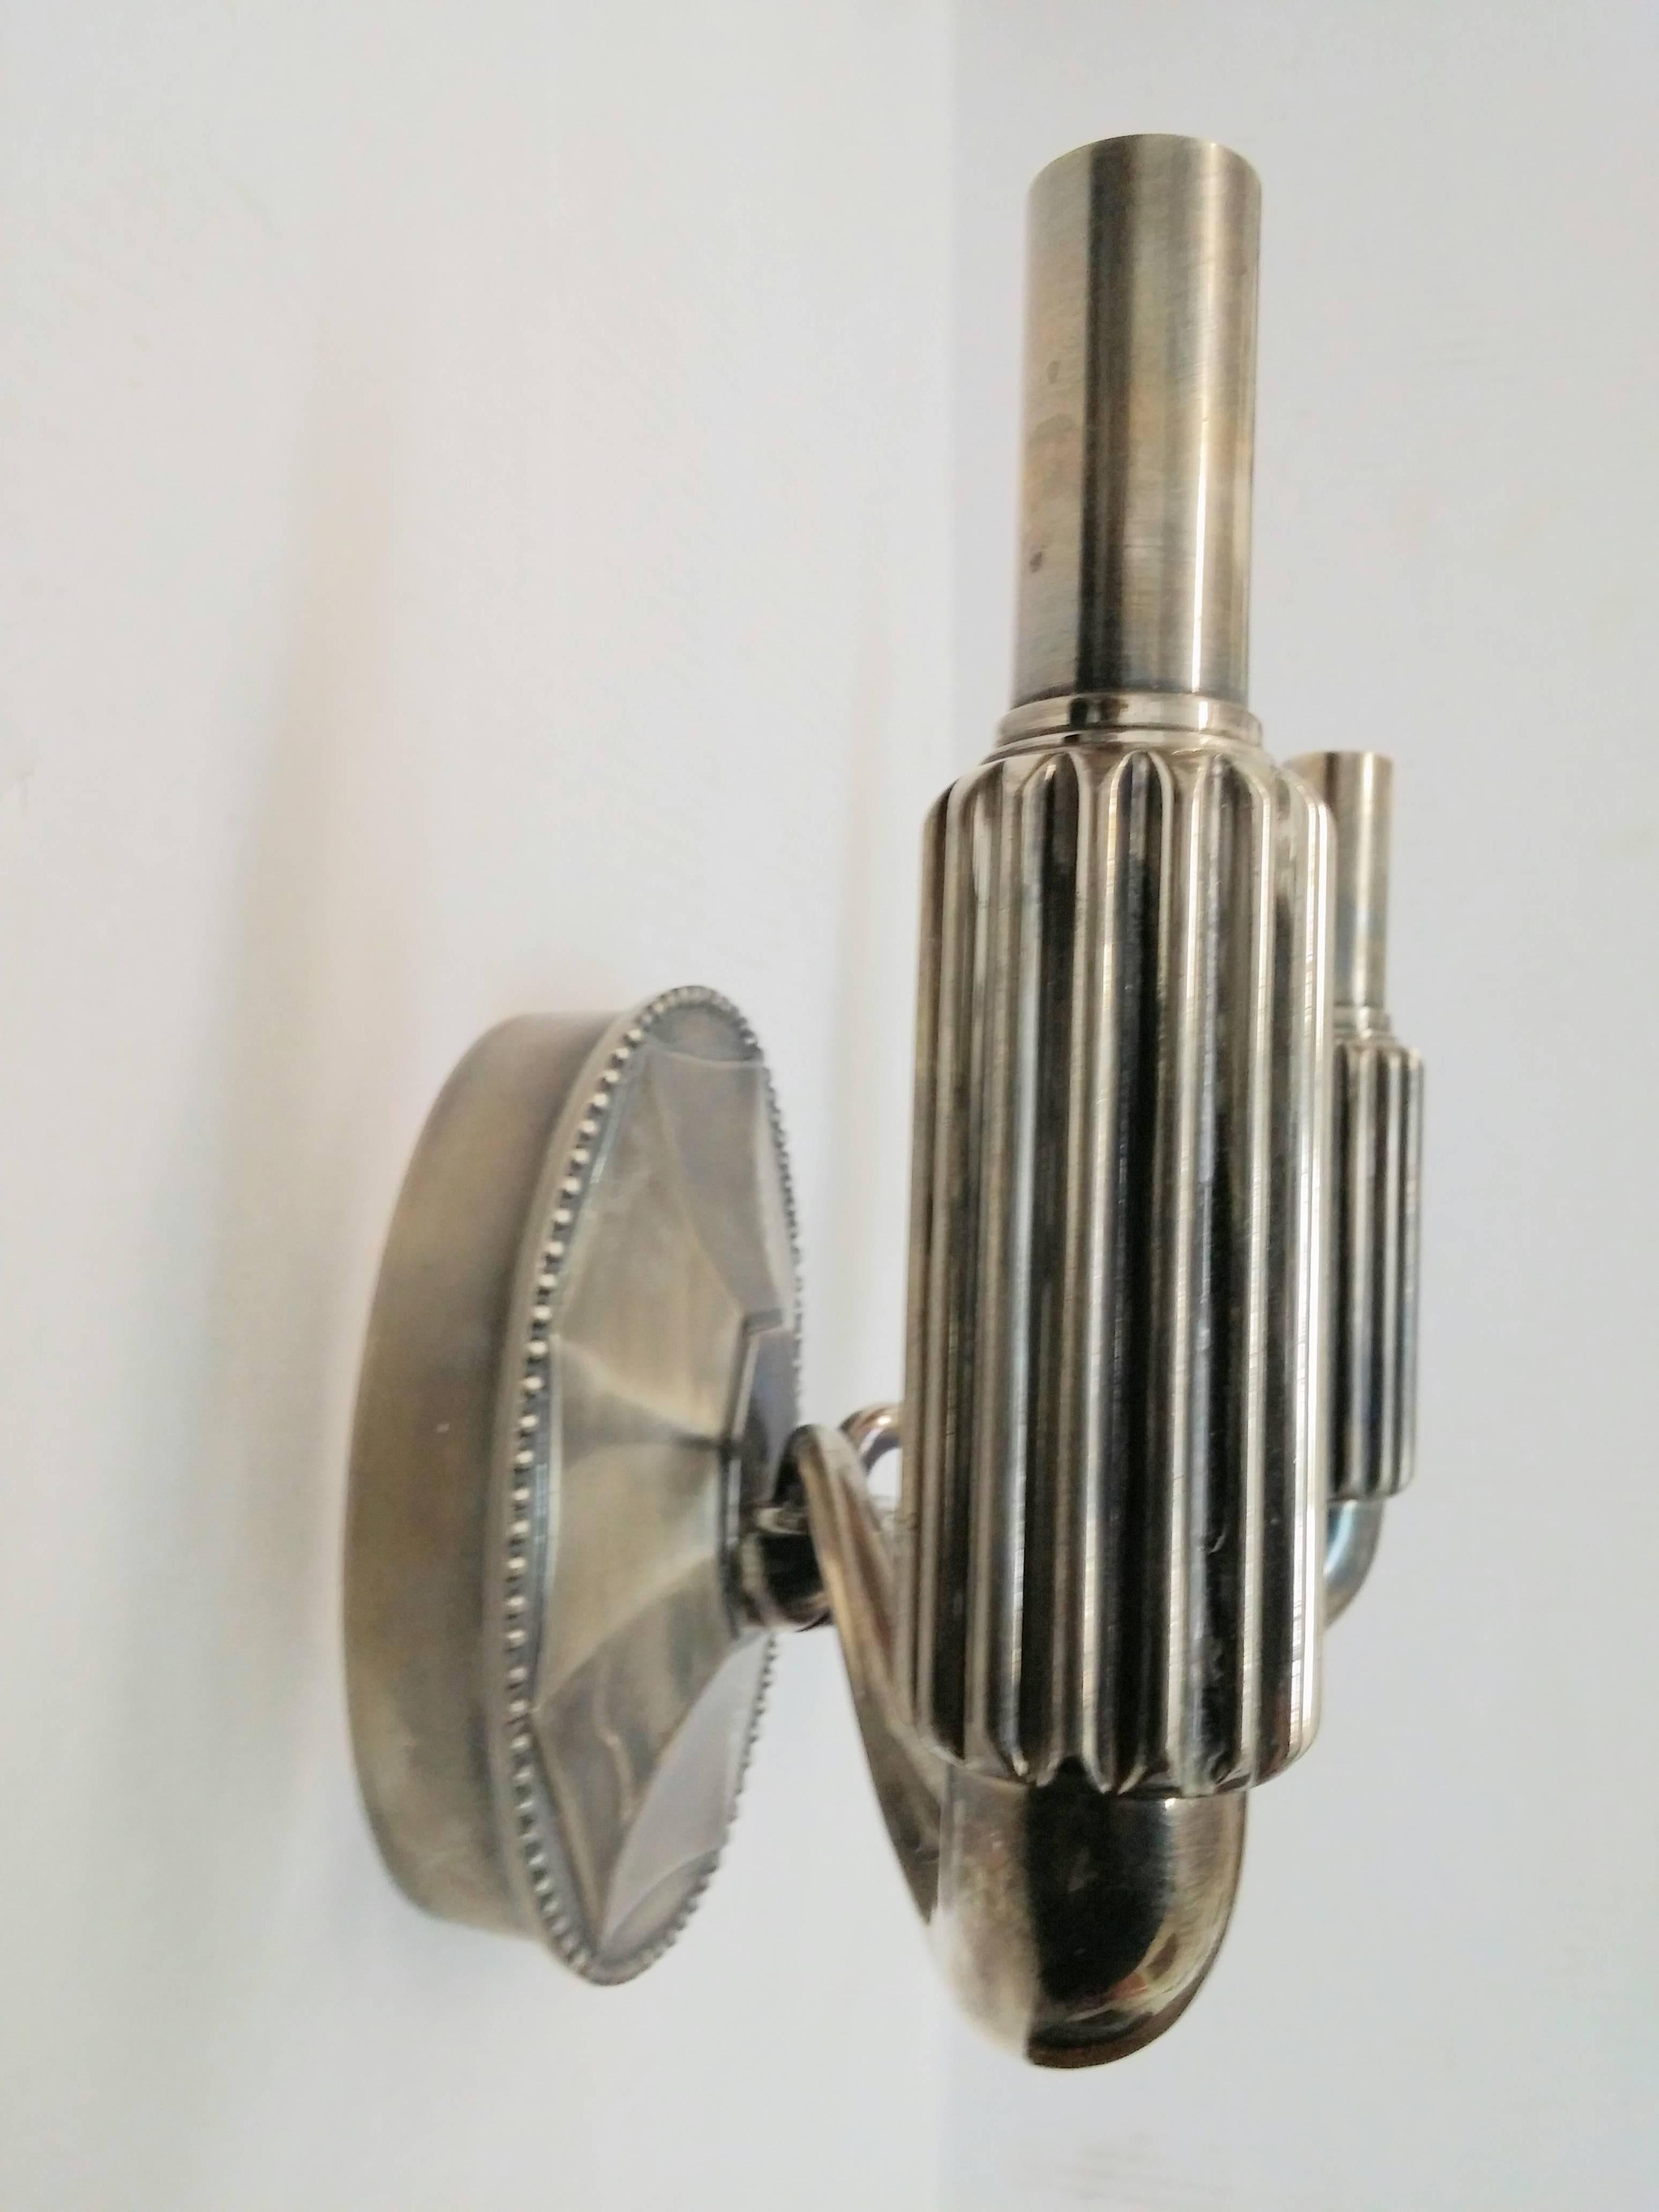 Art Deco A Pair of Sconces in the Manner of Ruhlmann (2 pairs available)